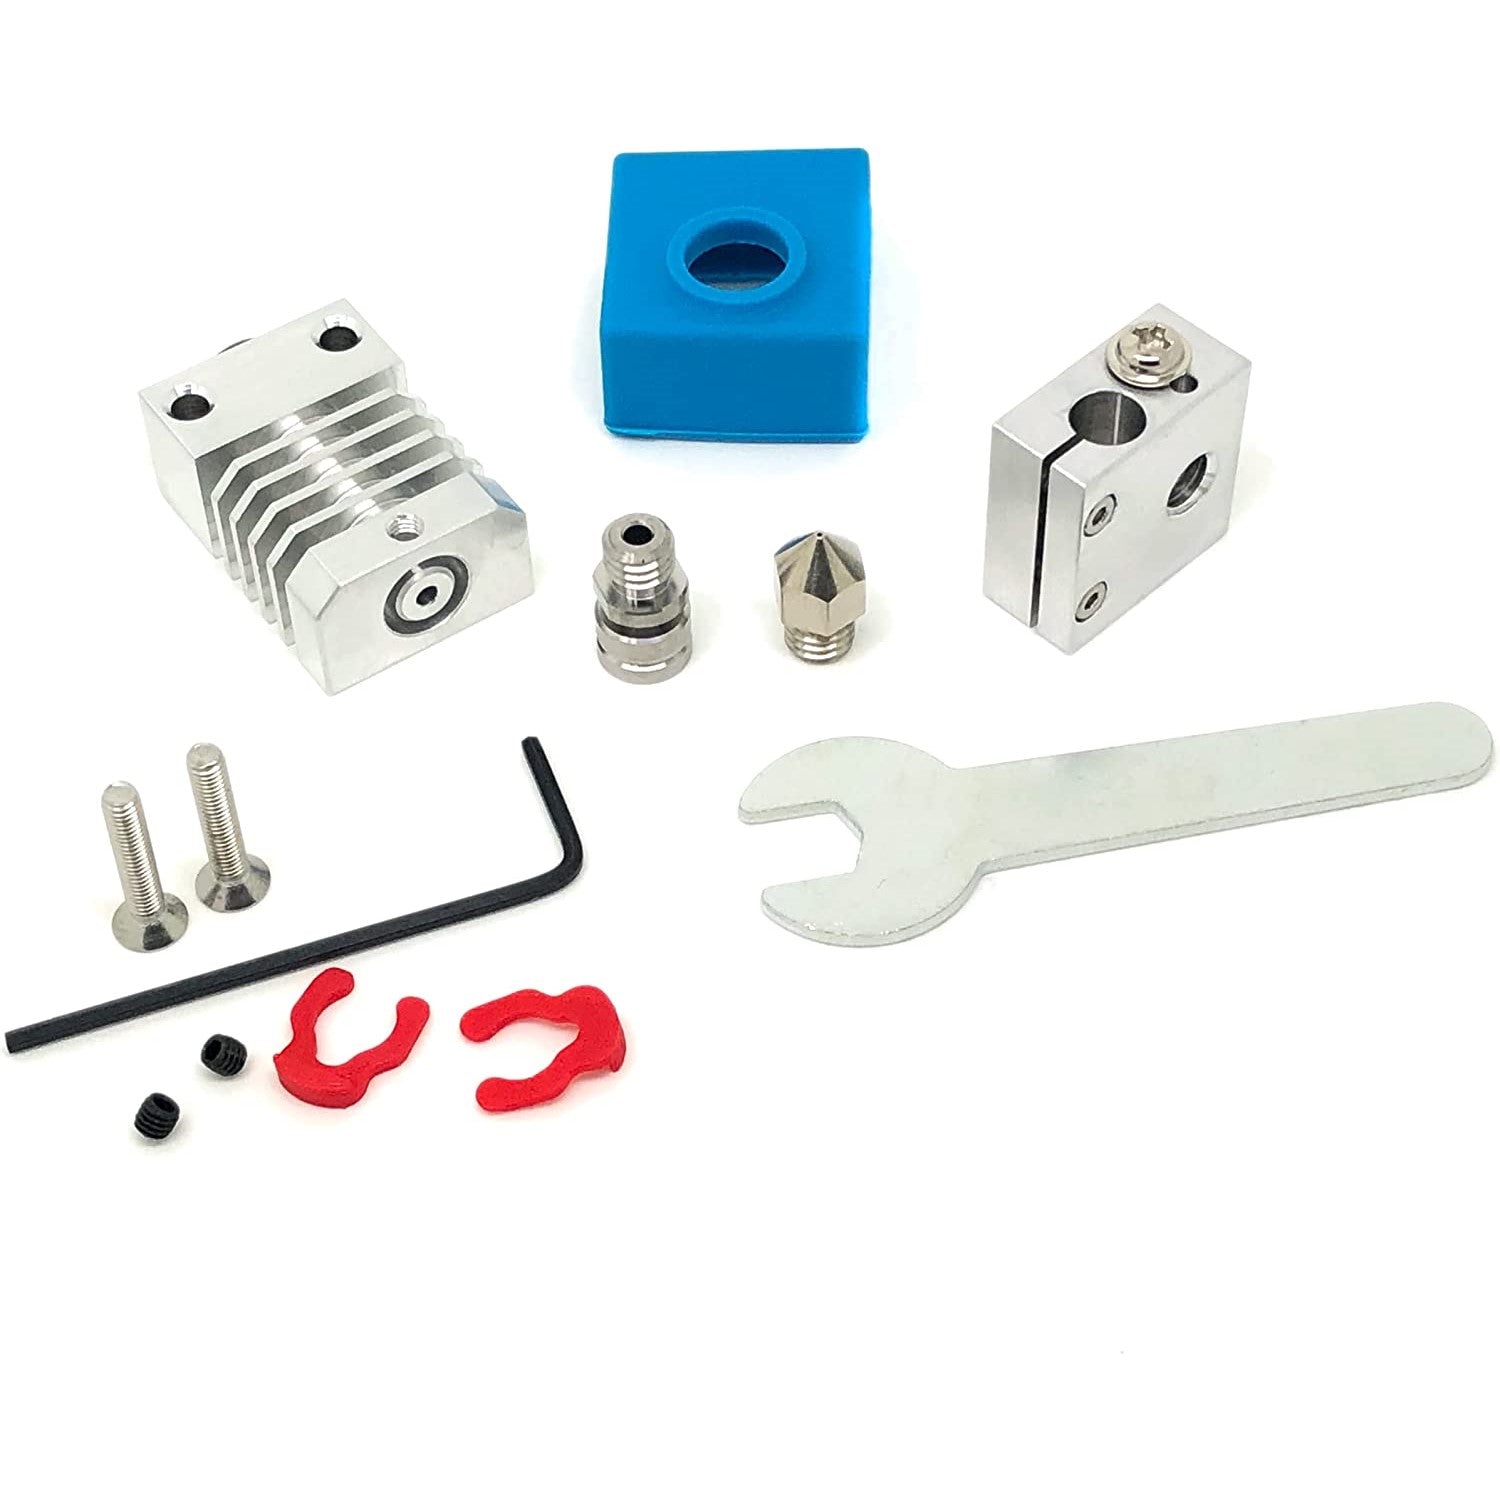 Micro Swiss All Metal Hotend Kit for Creality Ender 3 / Ender 3 Pro / CR-10 / CR10S / CR20 / Ender 5 3D Printers (M2583-04)